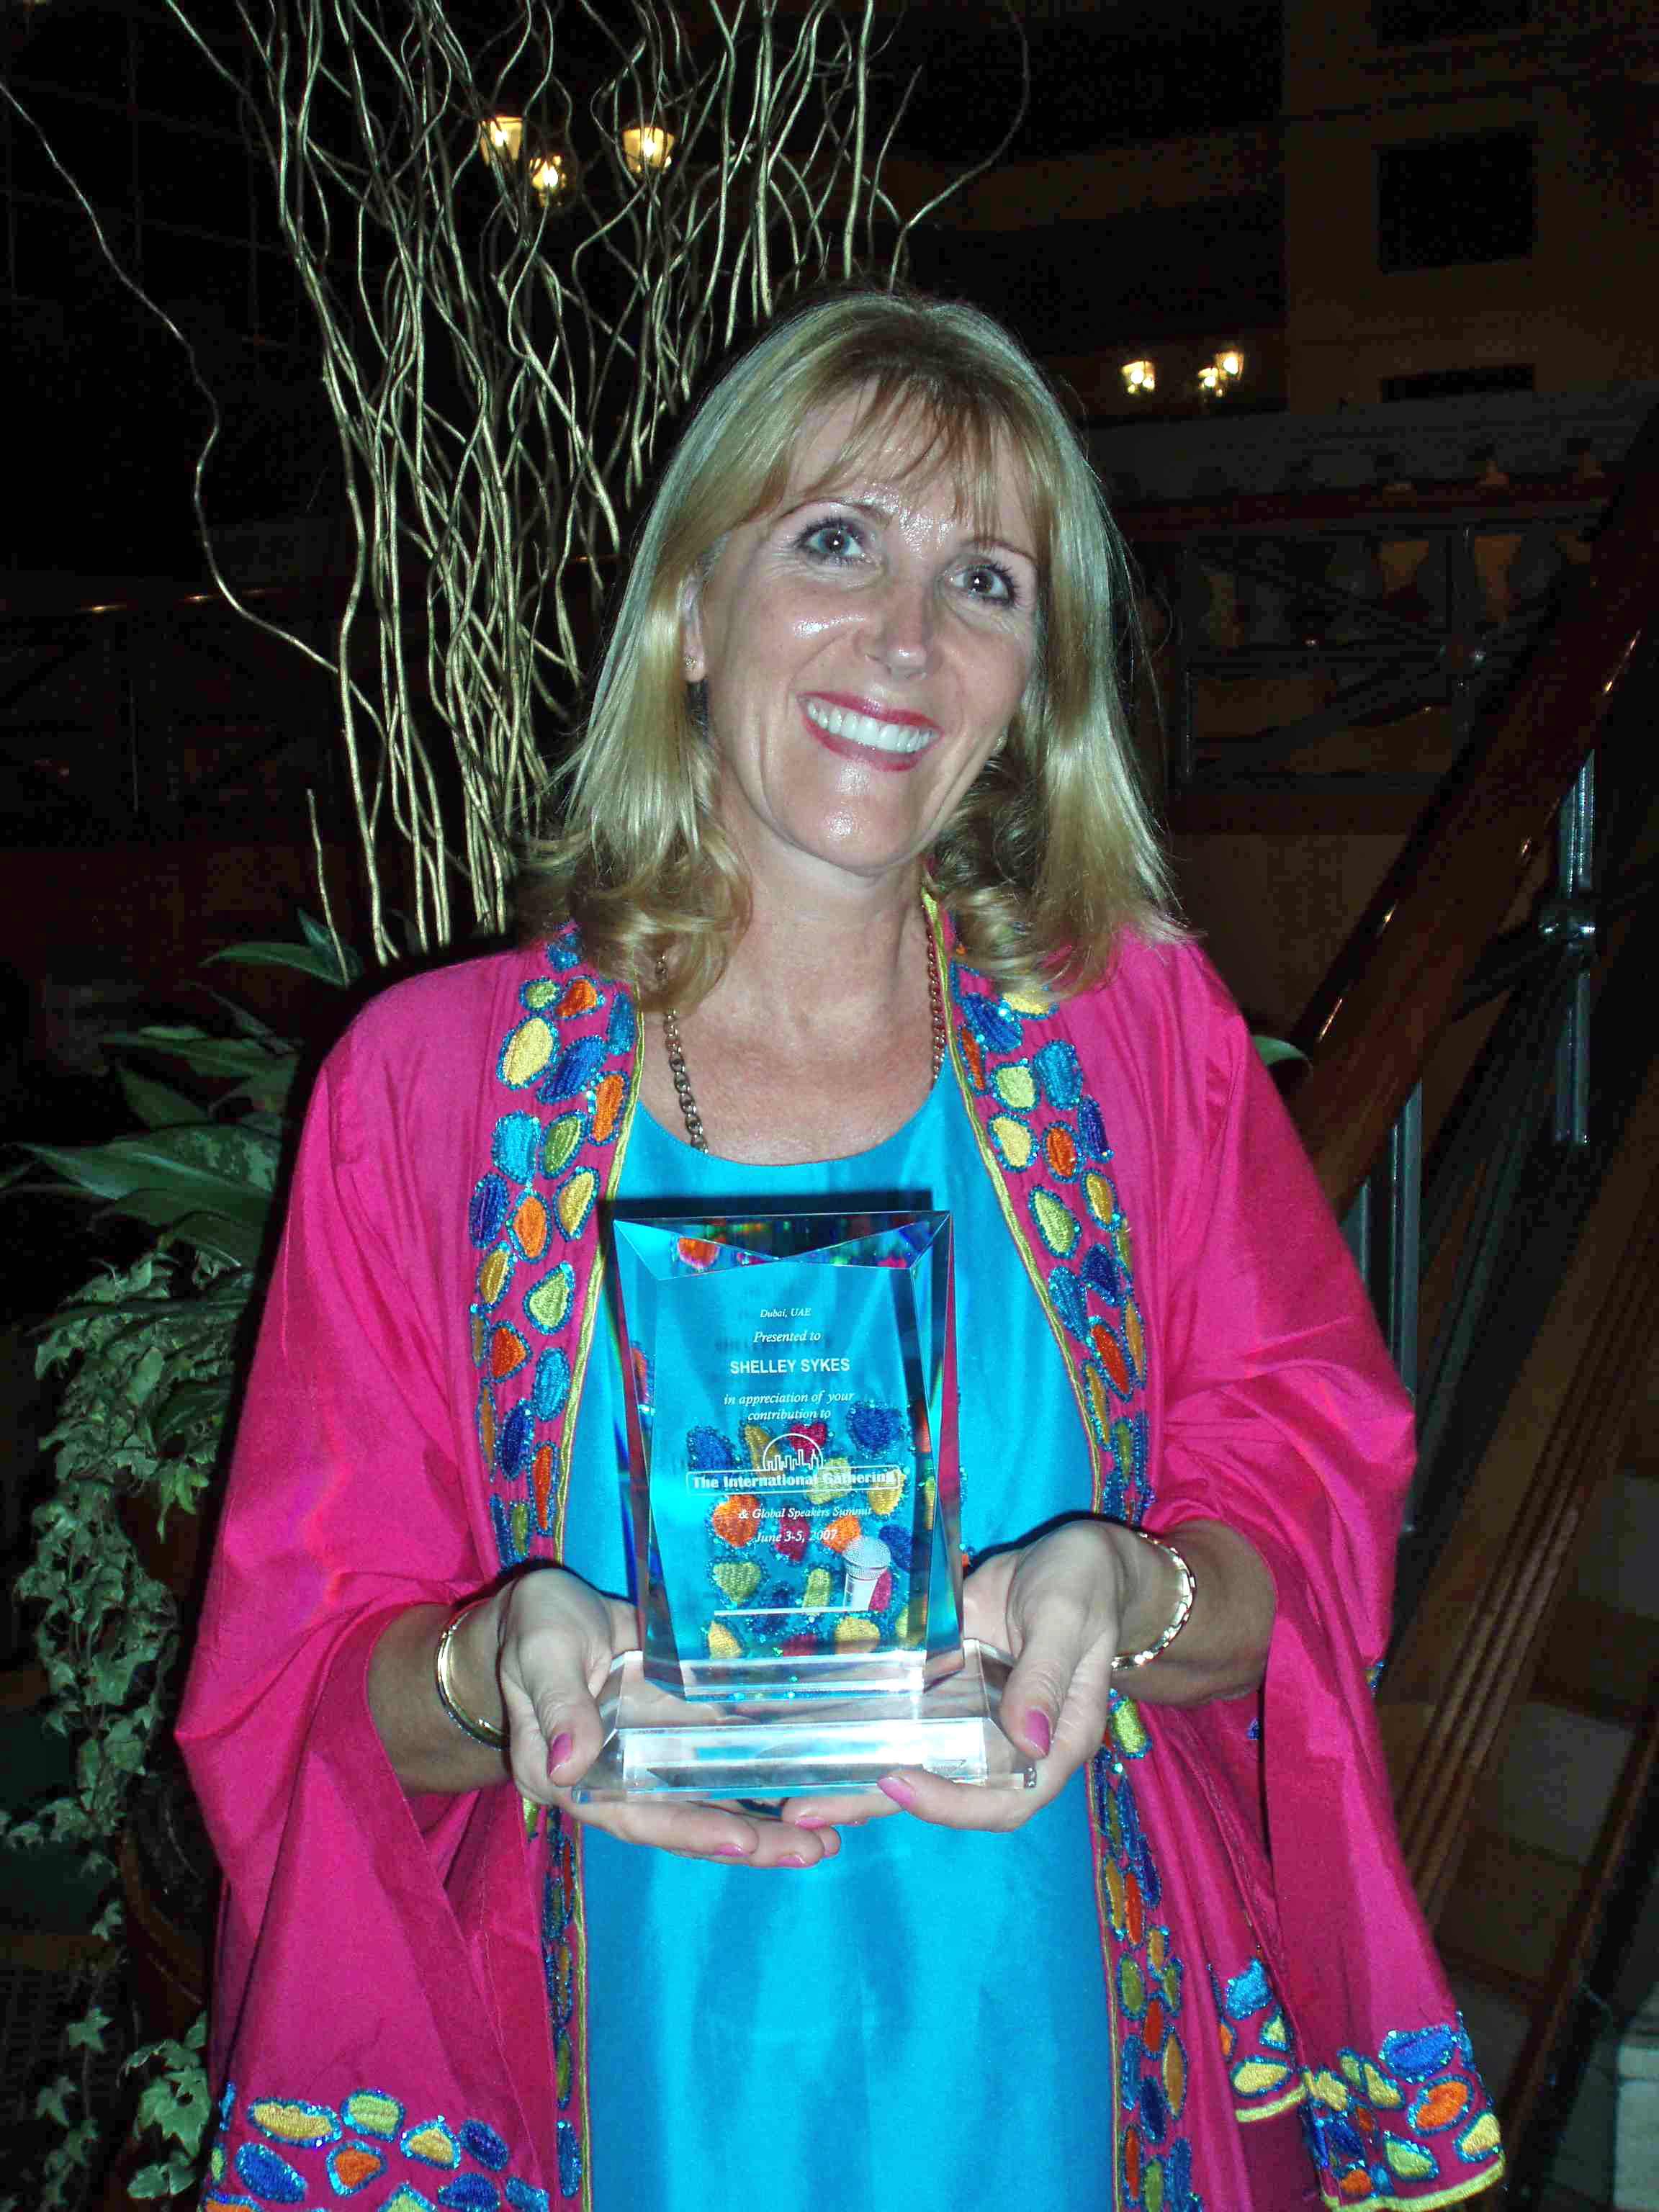 Shelley honored for being International Keynote Speaker to open the UAE Professional Speakers Ass.